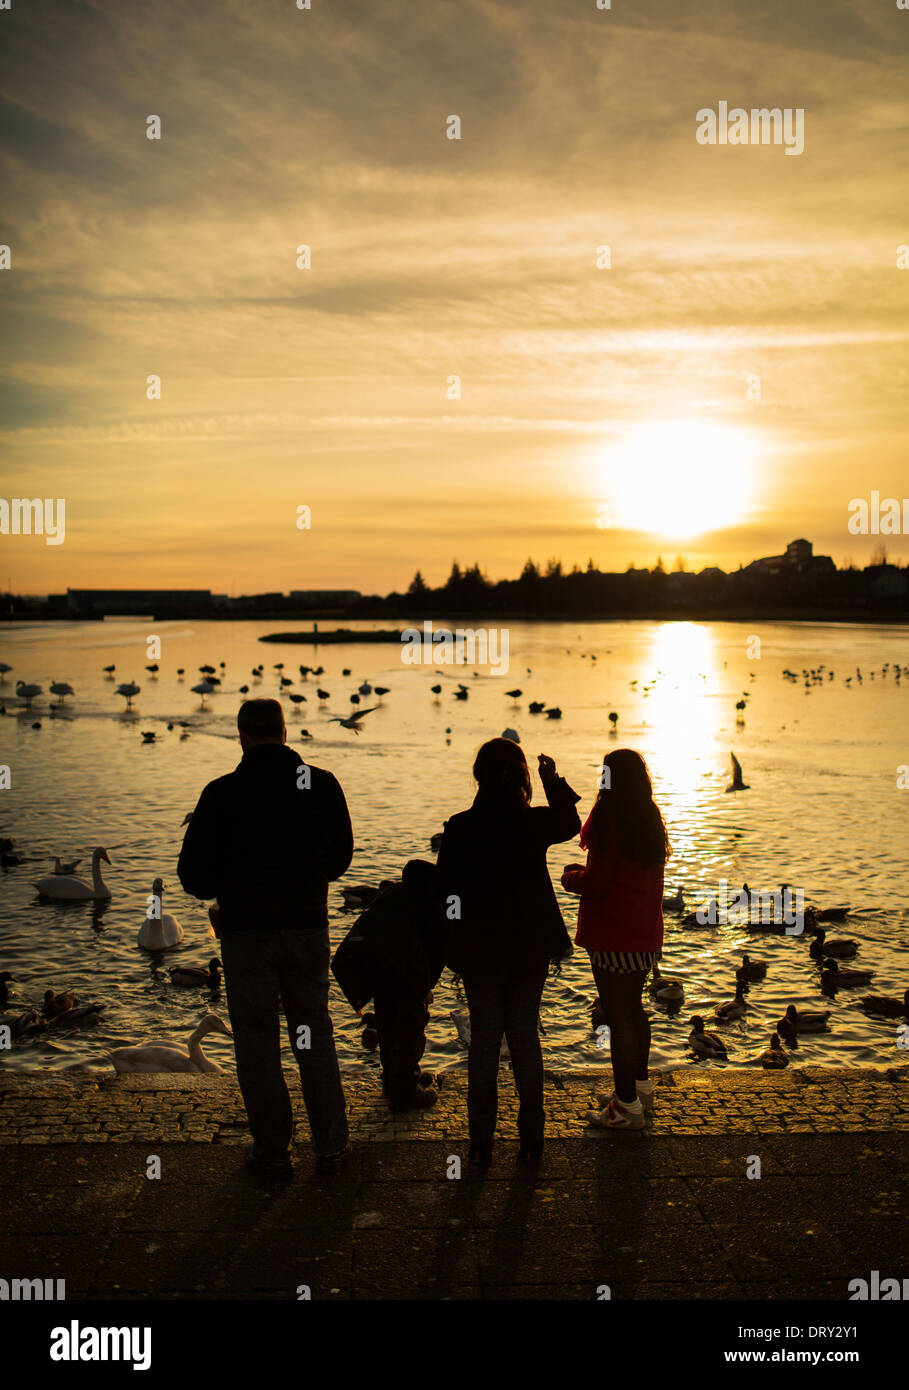 Watching the winter sunset at The Pond in Reykjavik, Iceland Stock Photo